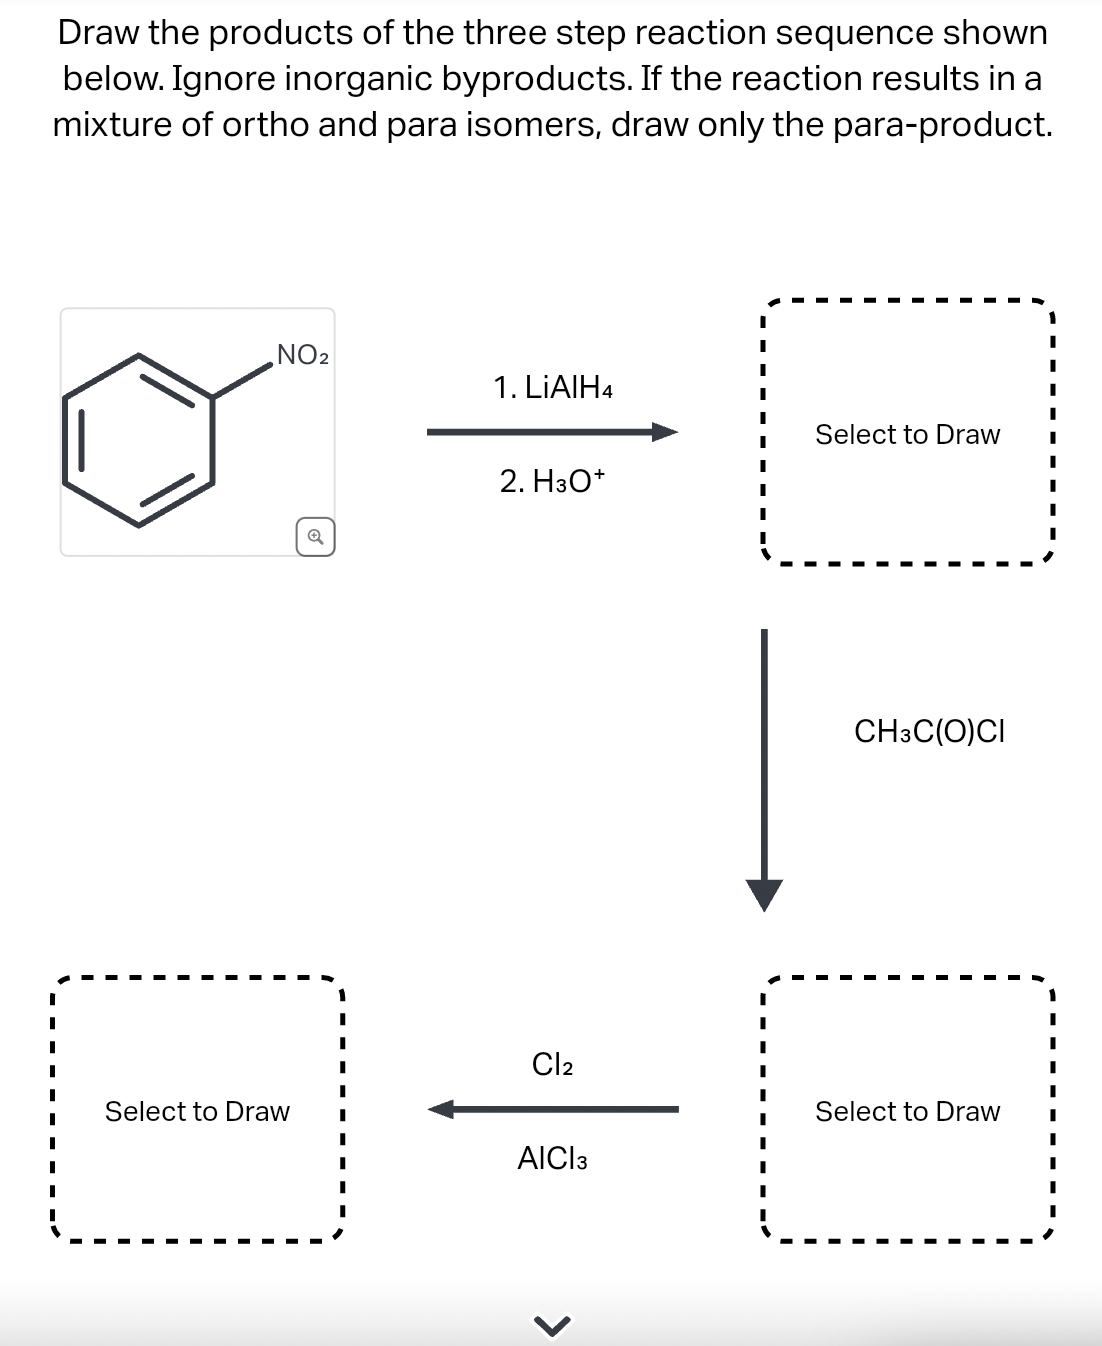 Draw the products of the three step reaction sequence shown
below. Ignore inorganic byproducts. If the reaction results in a
mixture of ortho and para isomers, draw only the para-product.
I
I
I
I
I
I
I
I
I
NO₂
Select to Draw
Q
1. LiAlH4
2. H3O+
Cl2
AICI 3
I
I
I
I
Select to Draw
CH3C(O)CI
Select to Draw
I
I
I
I
I
I
I